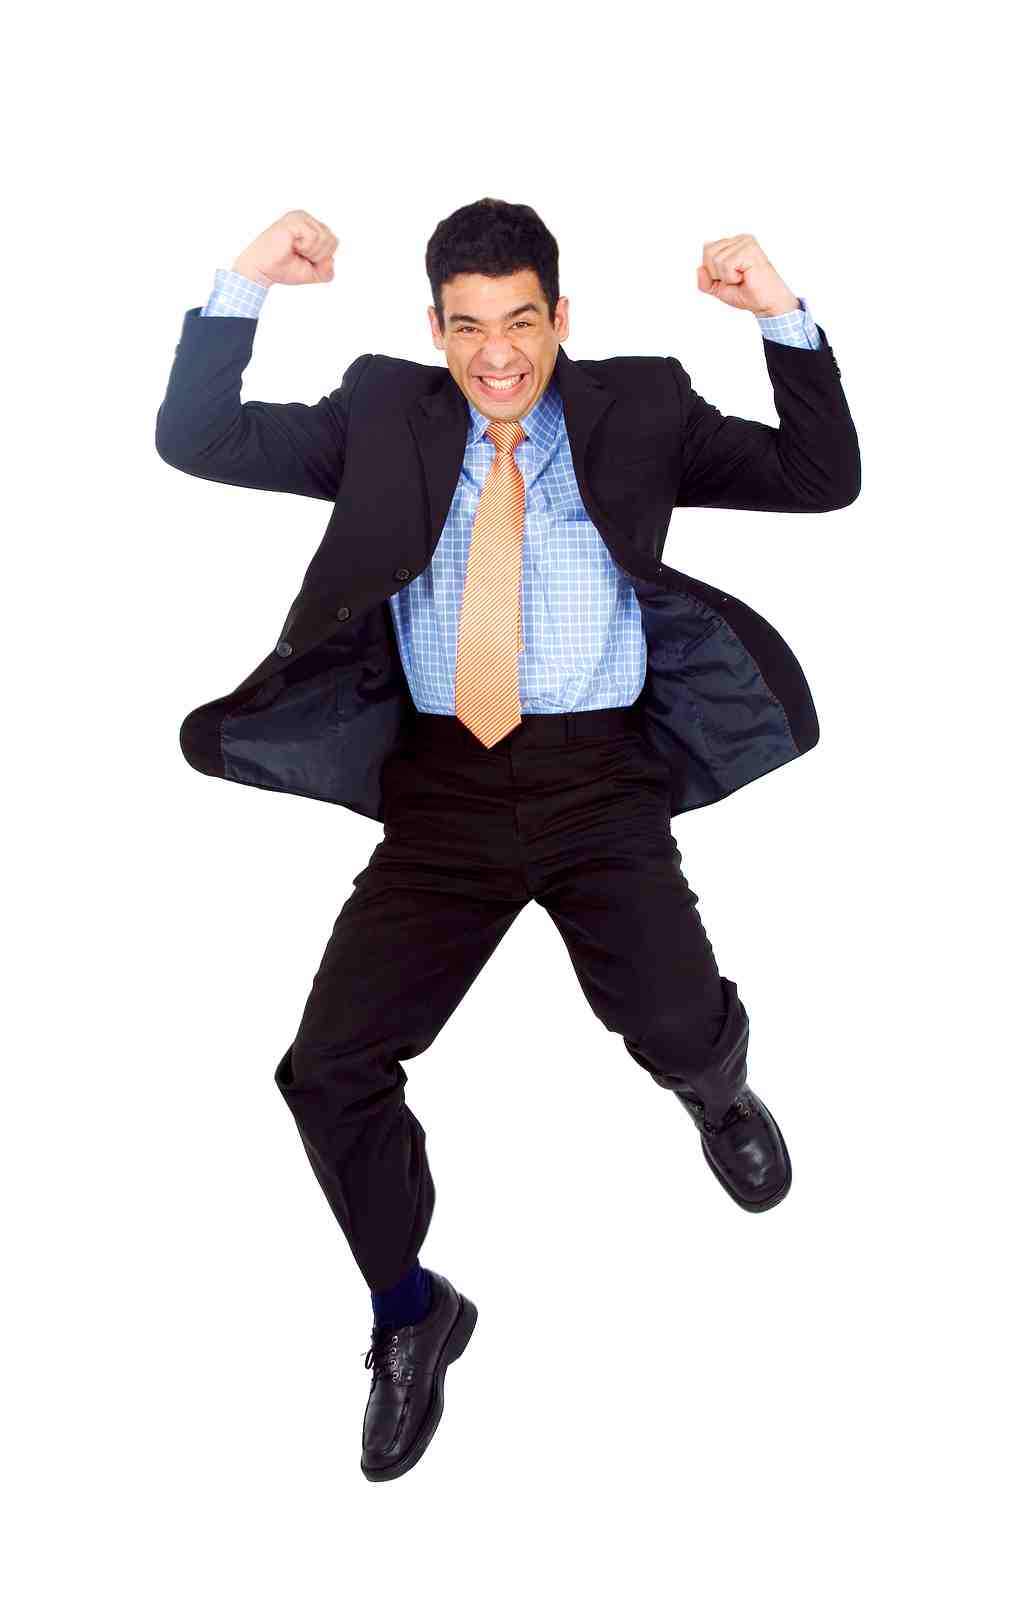 Man Jumping For Joy PNG - 50478